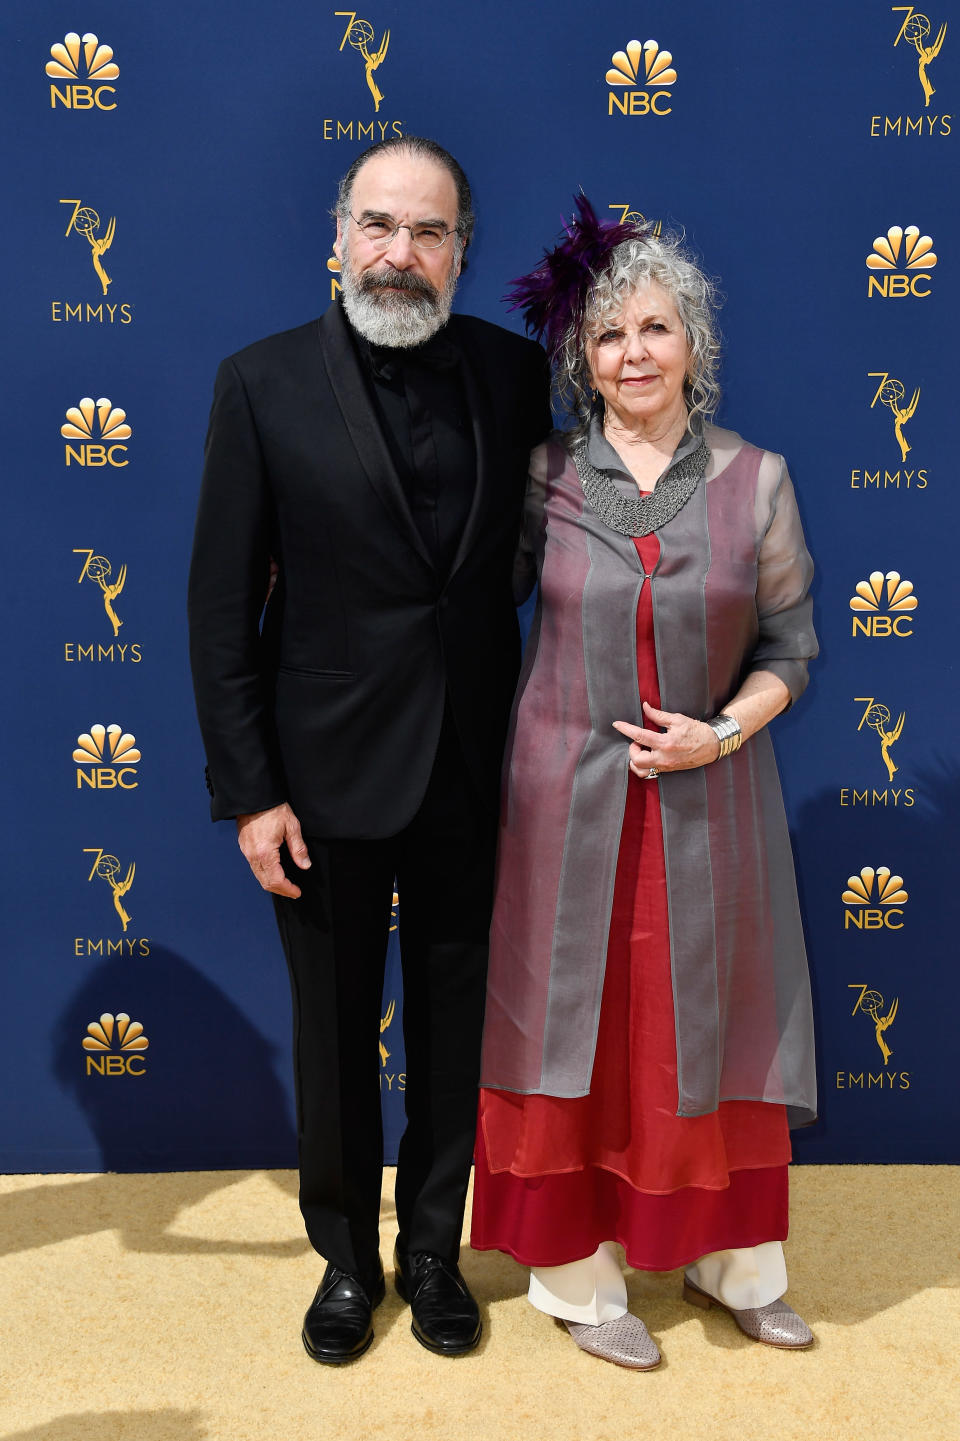 <p>Mandy Patinkin and Kathryn Grody attend the 70th Emmy Awards at Microsoft Theater on Sept. 17, 2018, in Los Angeles. (Photo by Frazer Harrison/Getty Images) </p>